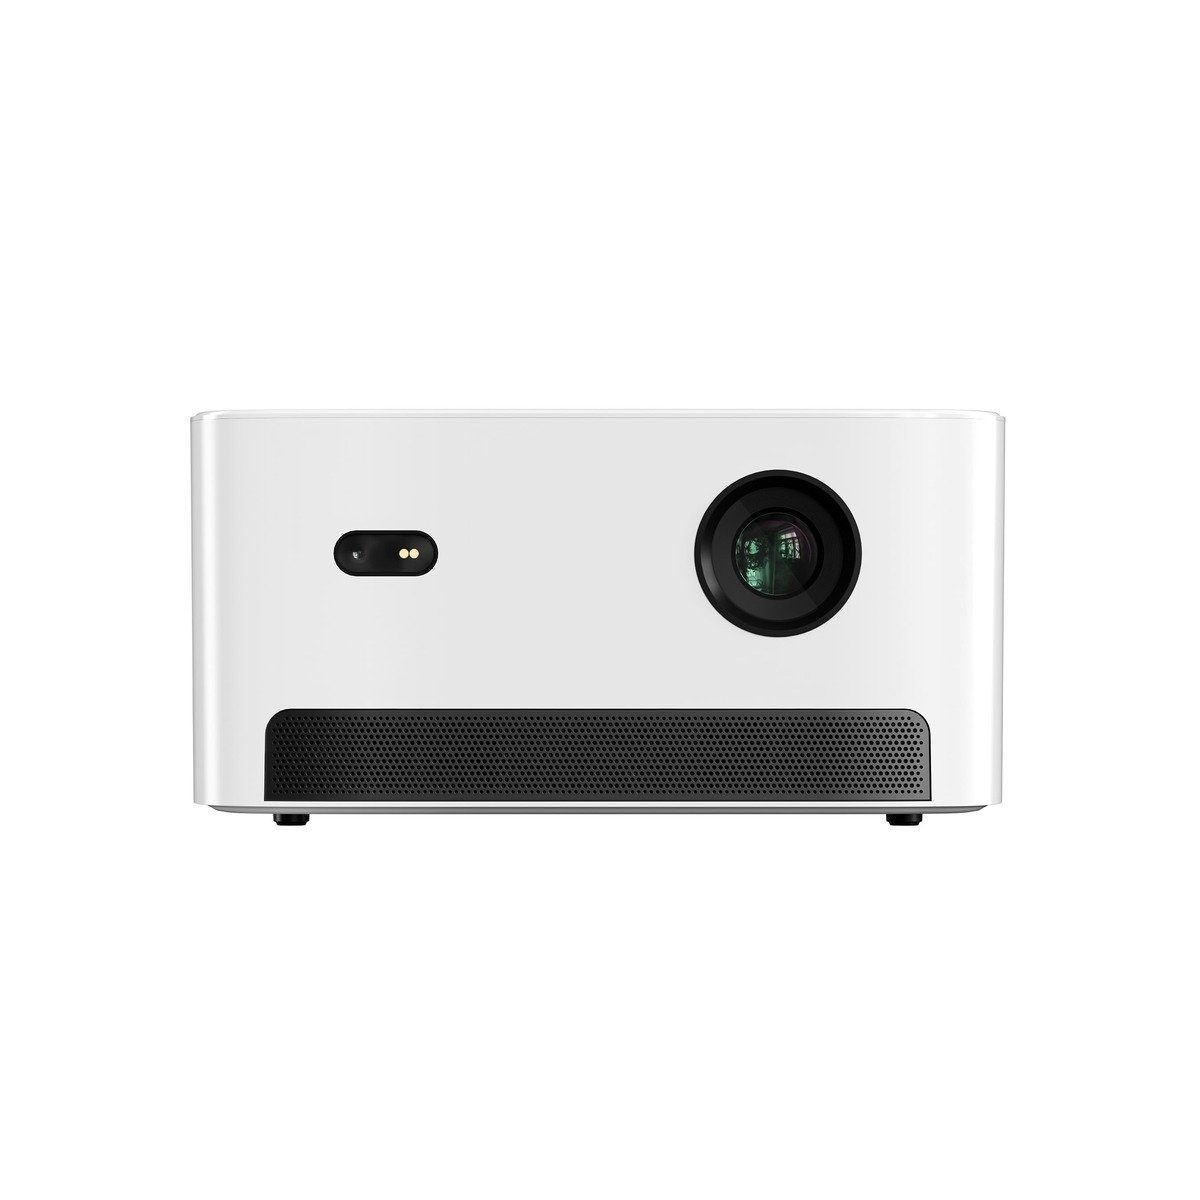 540LM Dangbei Beamer Projector, White Neo